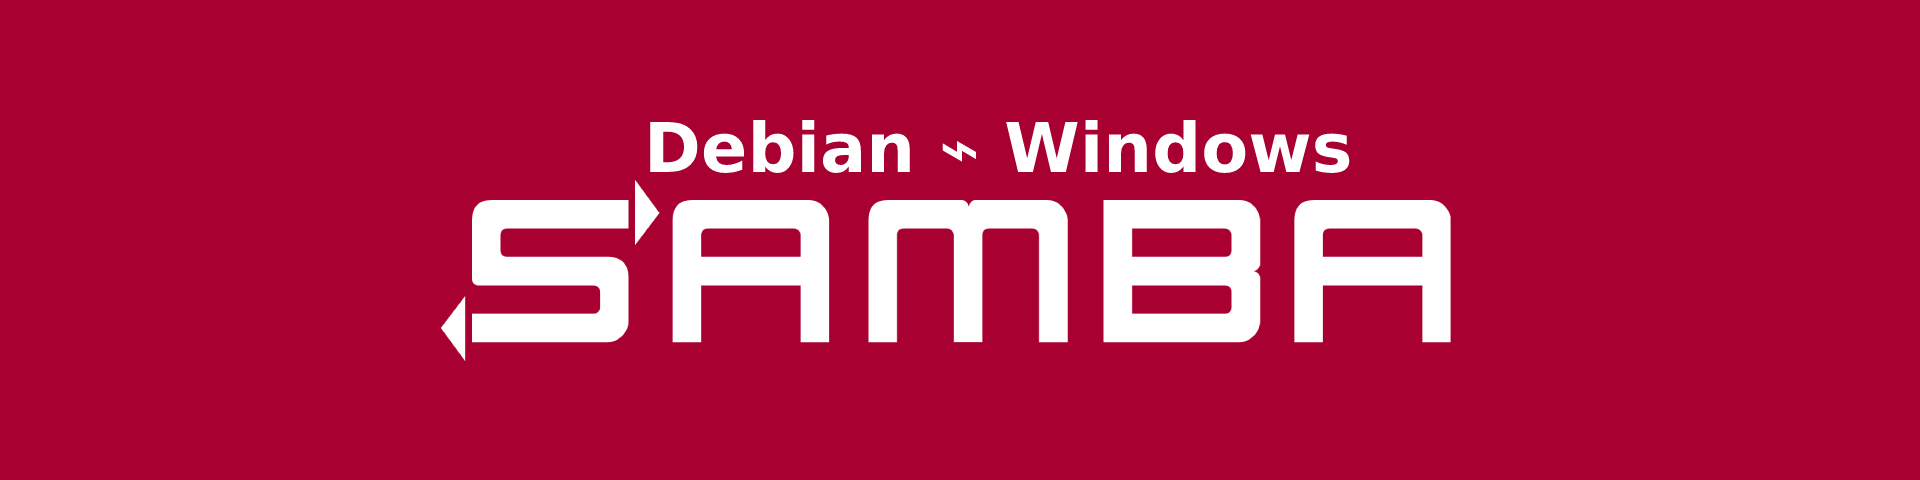 Your files from Windows, installing a Samba Server on Debian